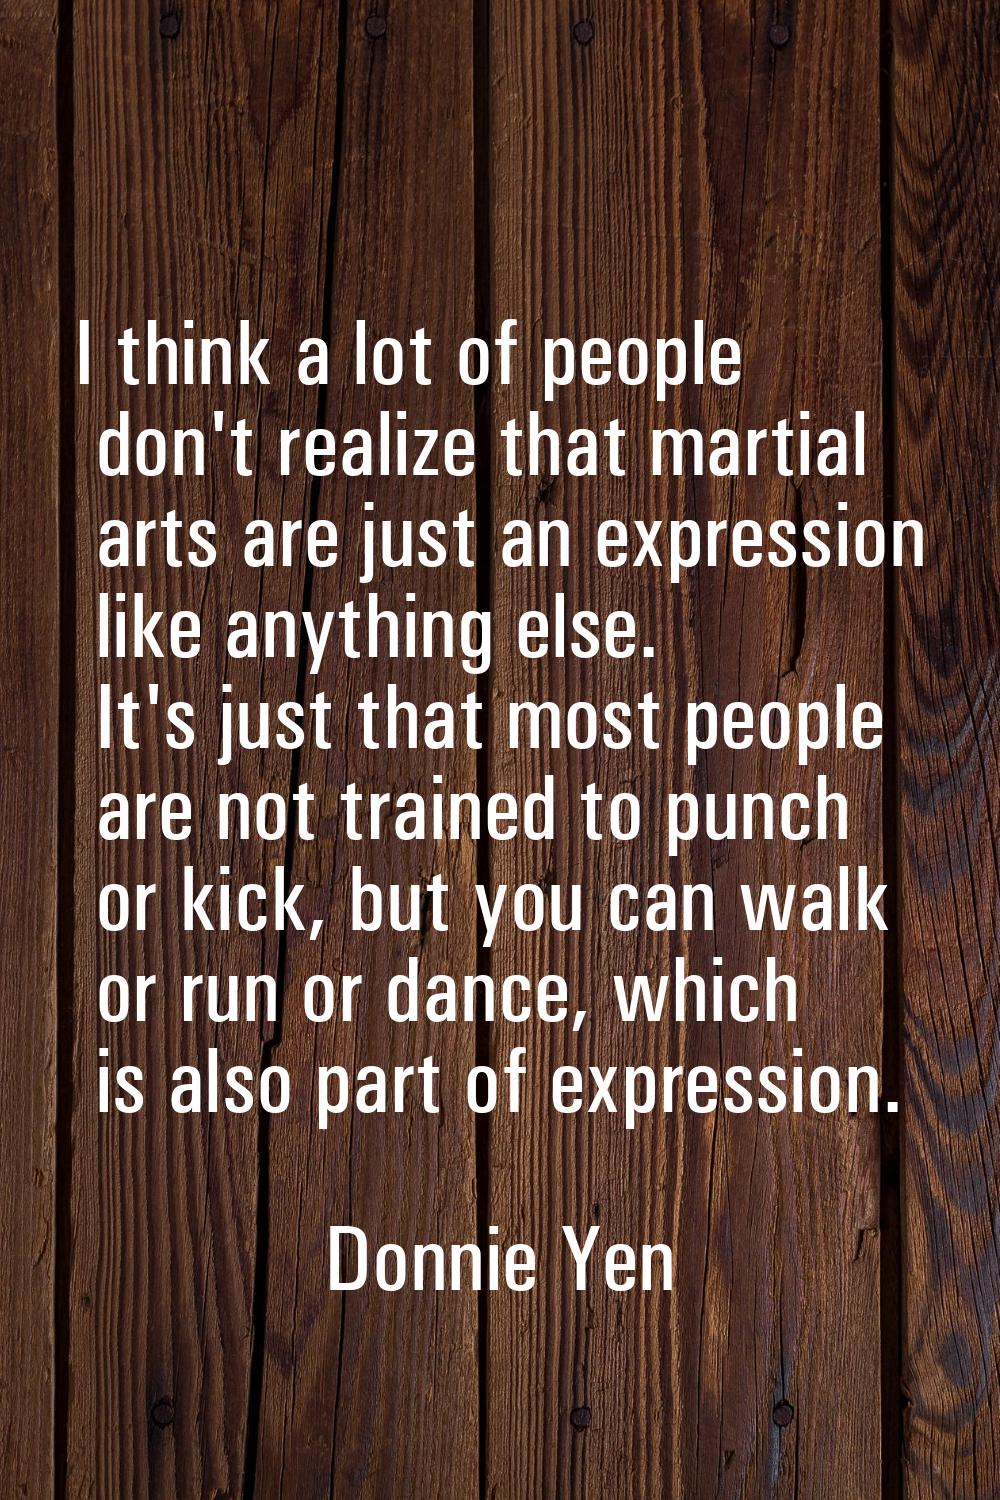 I think a lot of people don't realize that martial arts are just an expression like anything else. 